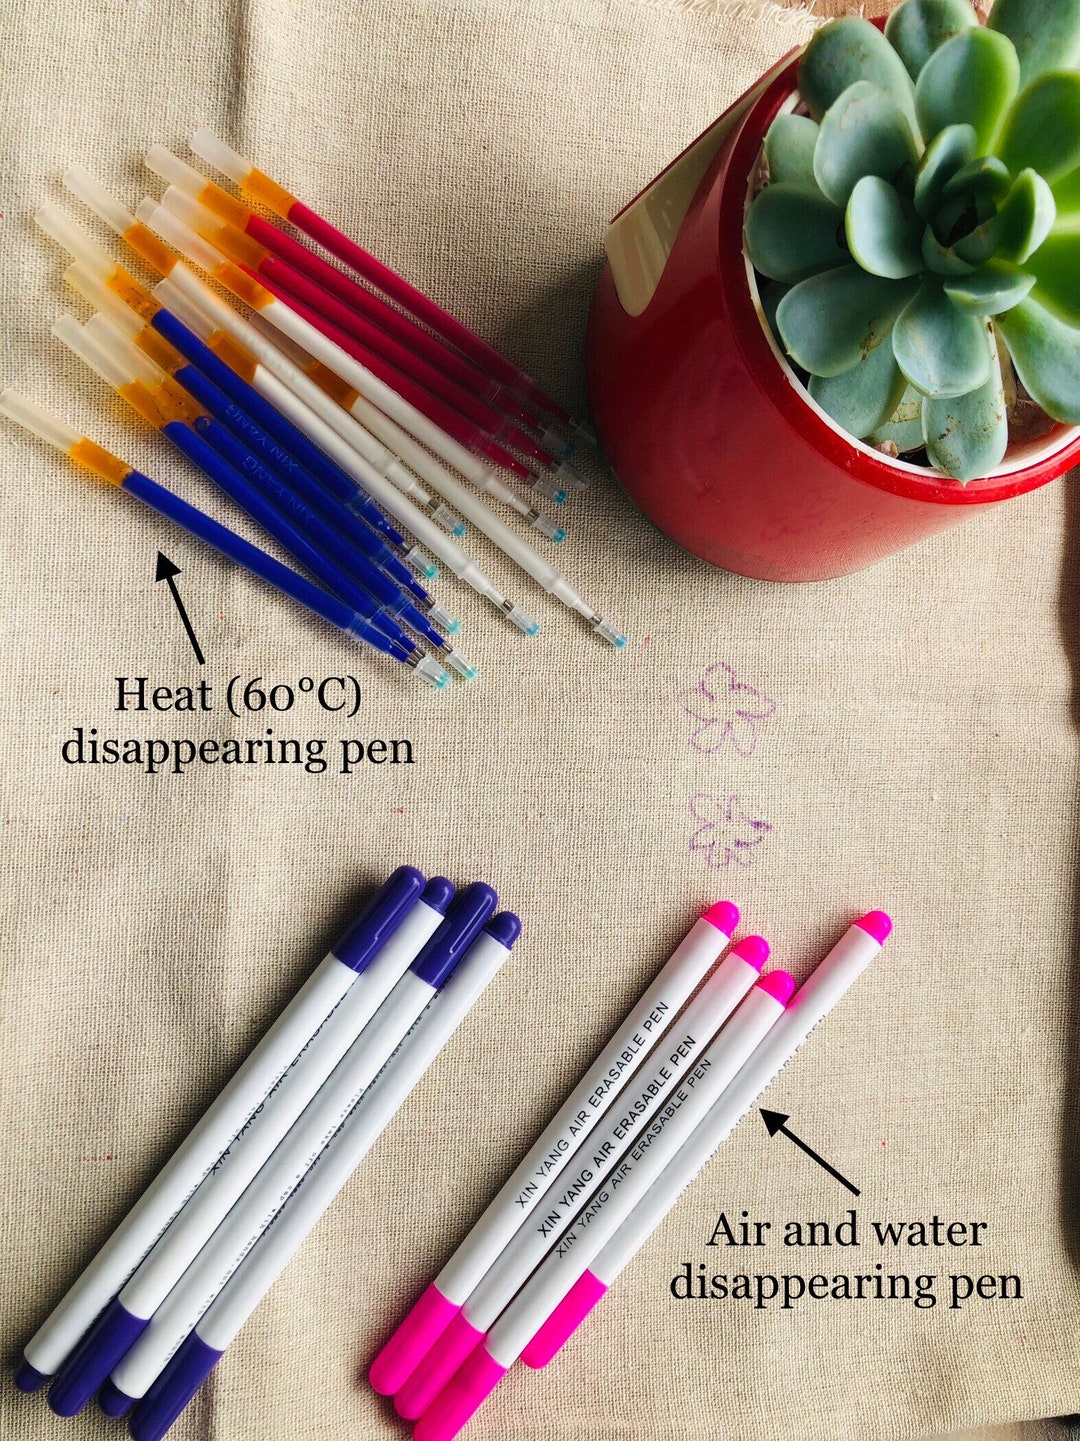 Air Erasable Fabric Marking Pen Disappearing Ink Makring Pen Fabric Marker Water Soluble Ink Pen for Embroidery Cross Stitch Handicarft Needlework